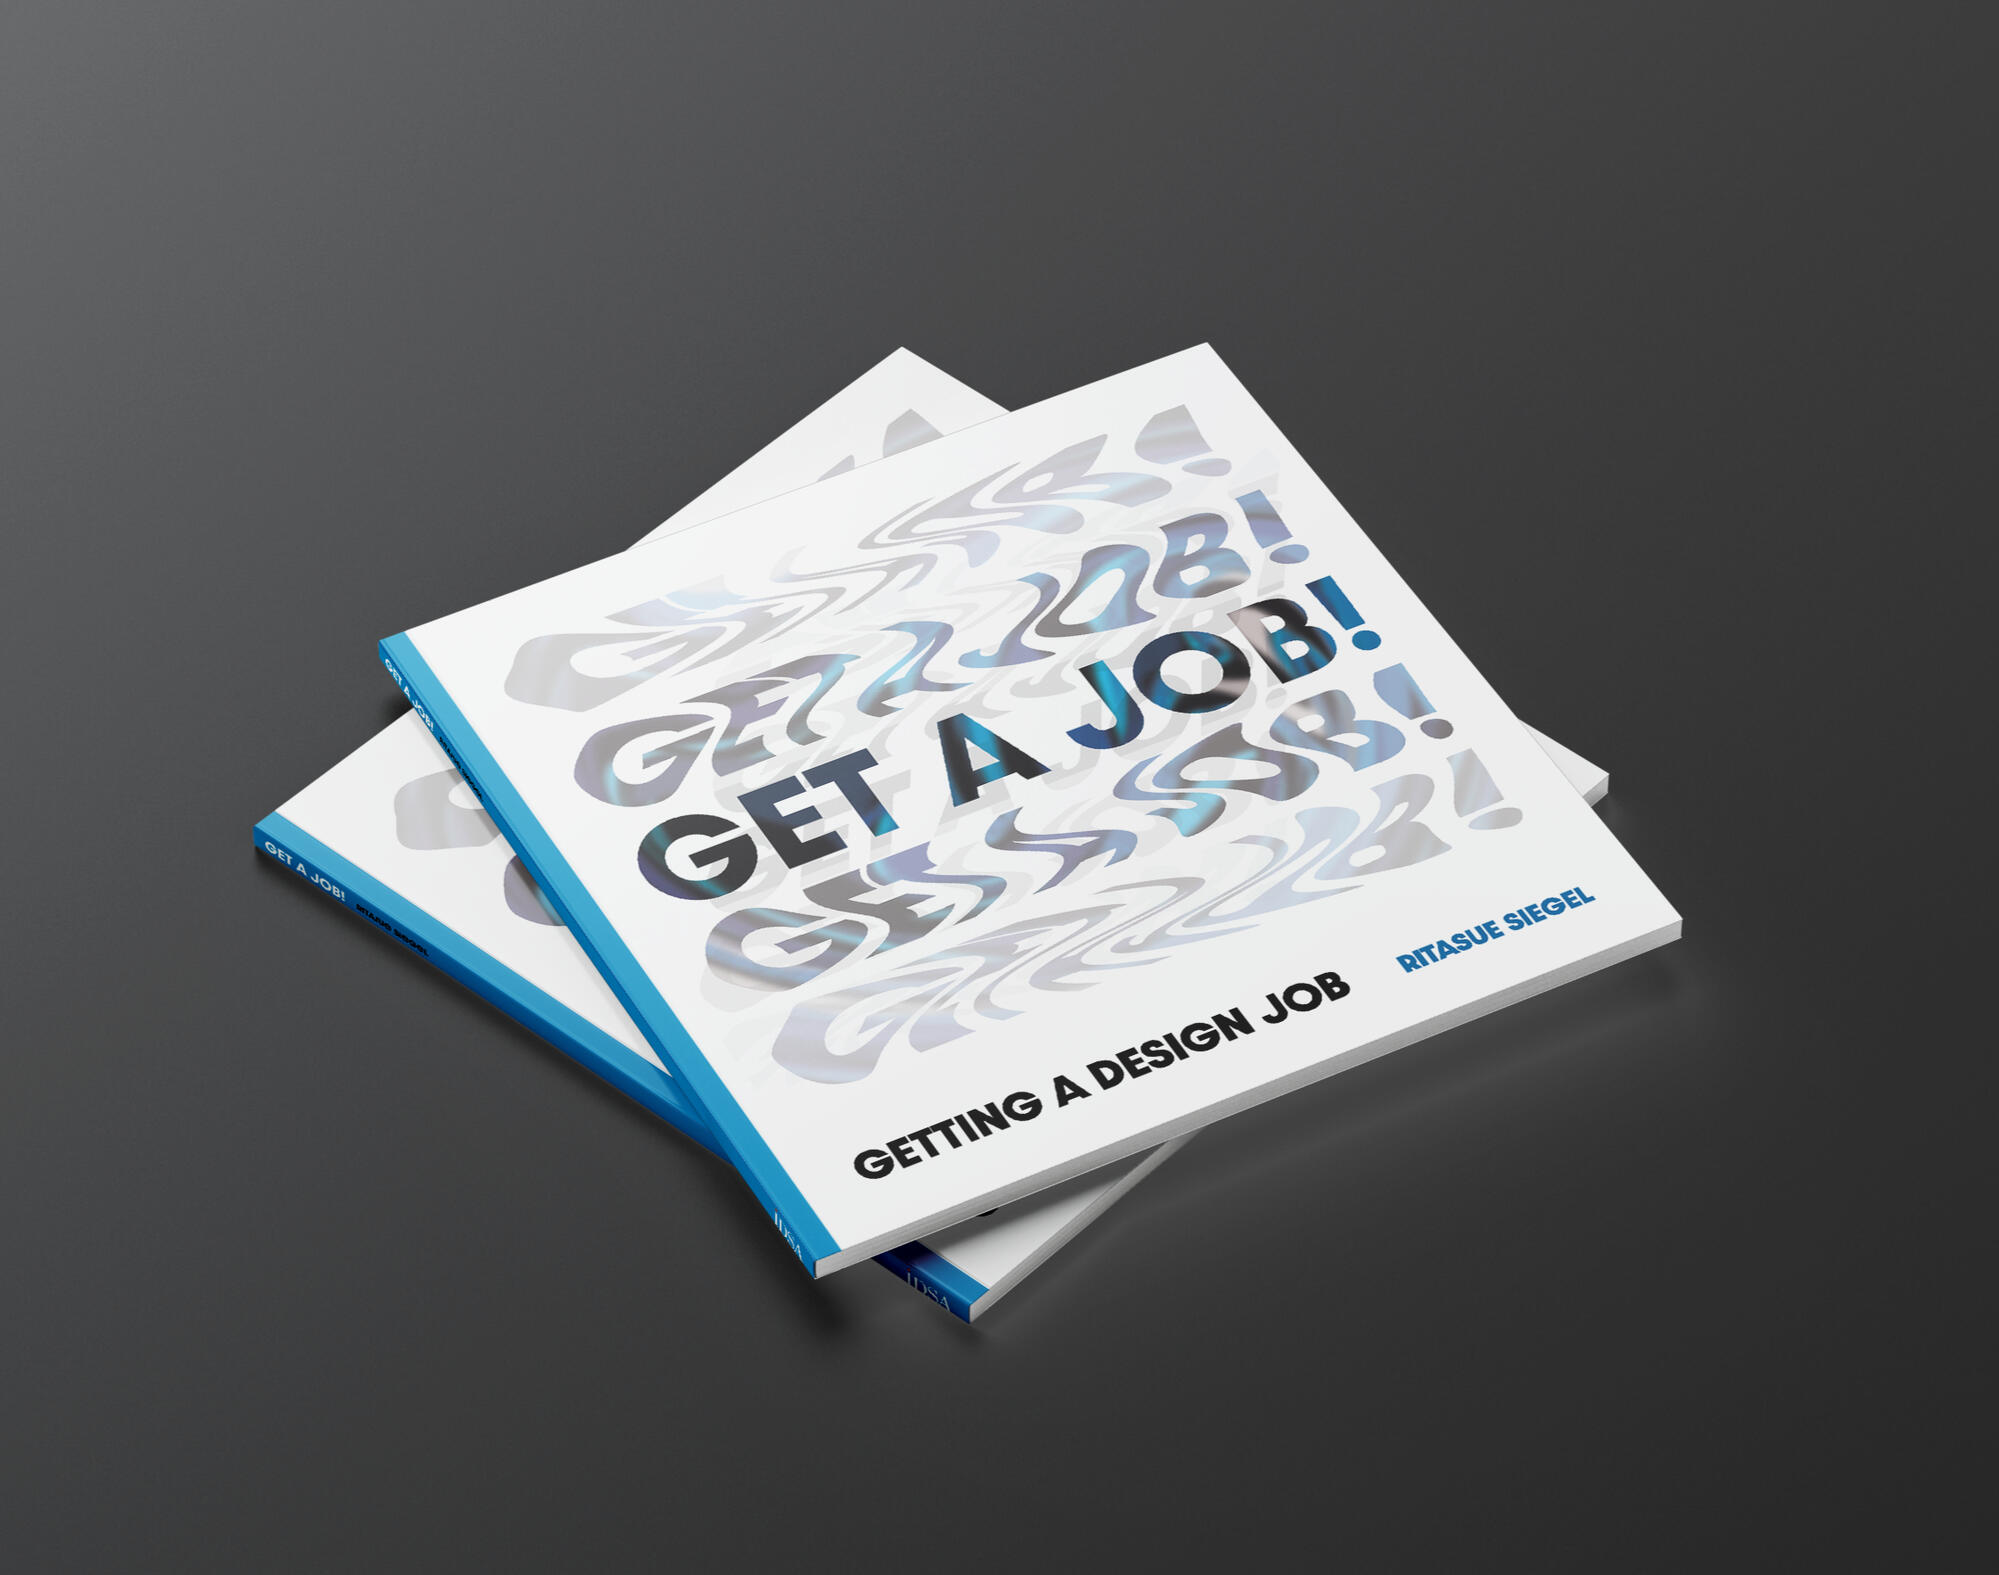 Mockup of the Get a Job book cover.